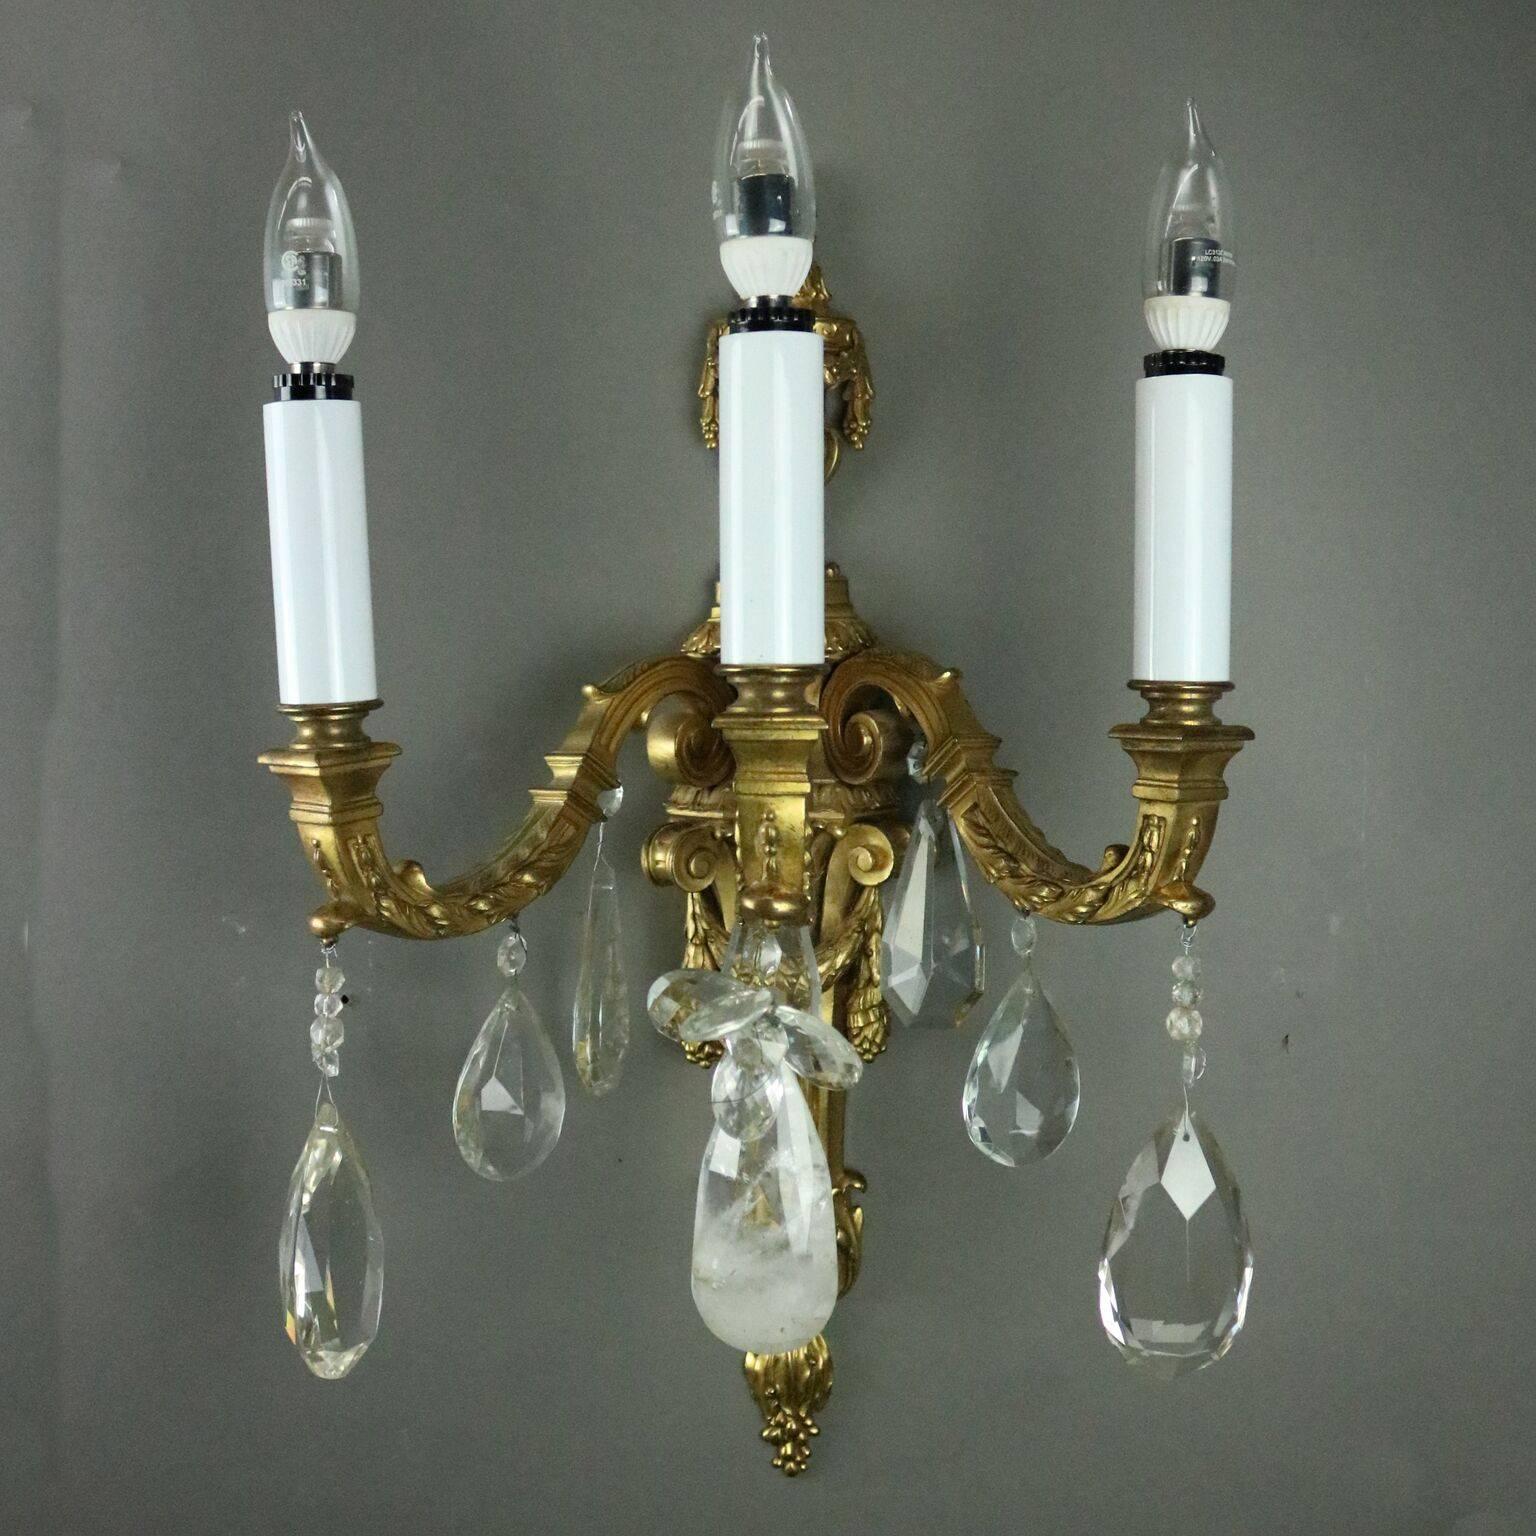 Gilt Metal Antique French Torchiere Gilt Bonze & Crystal Three-Light Wall Sconce